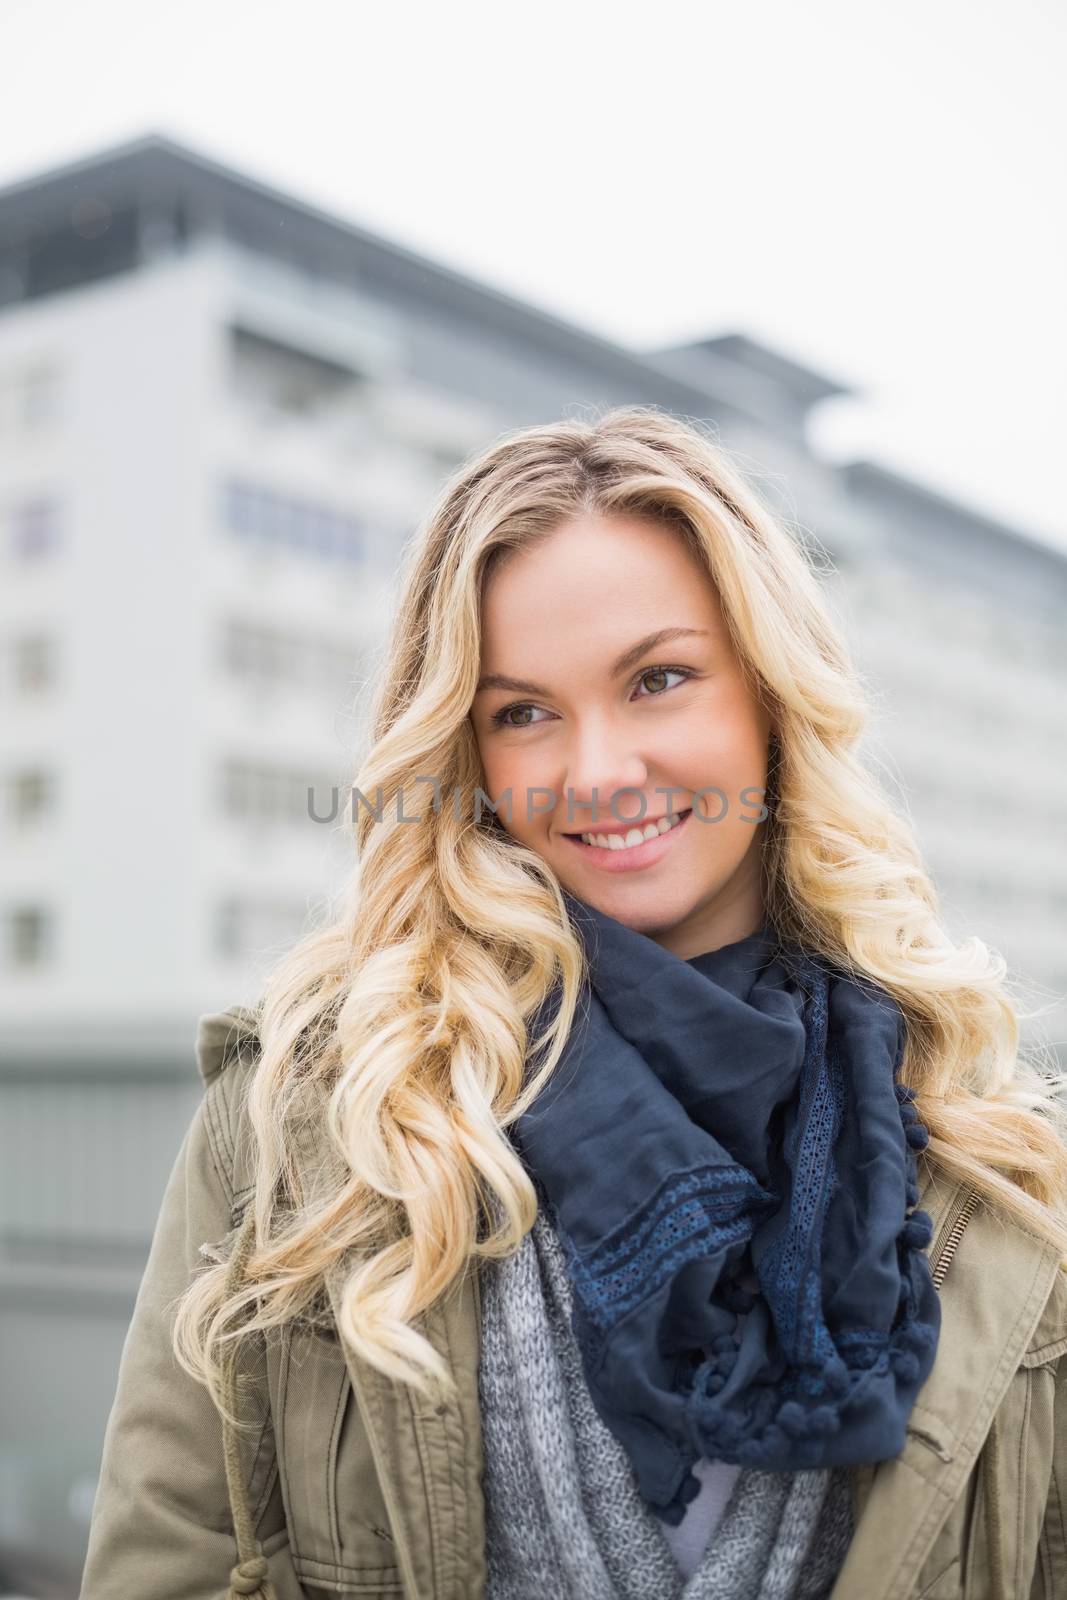 Cheerful casual blonde posing outdoors on urban background